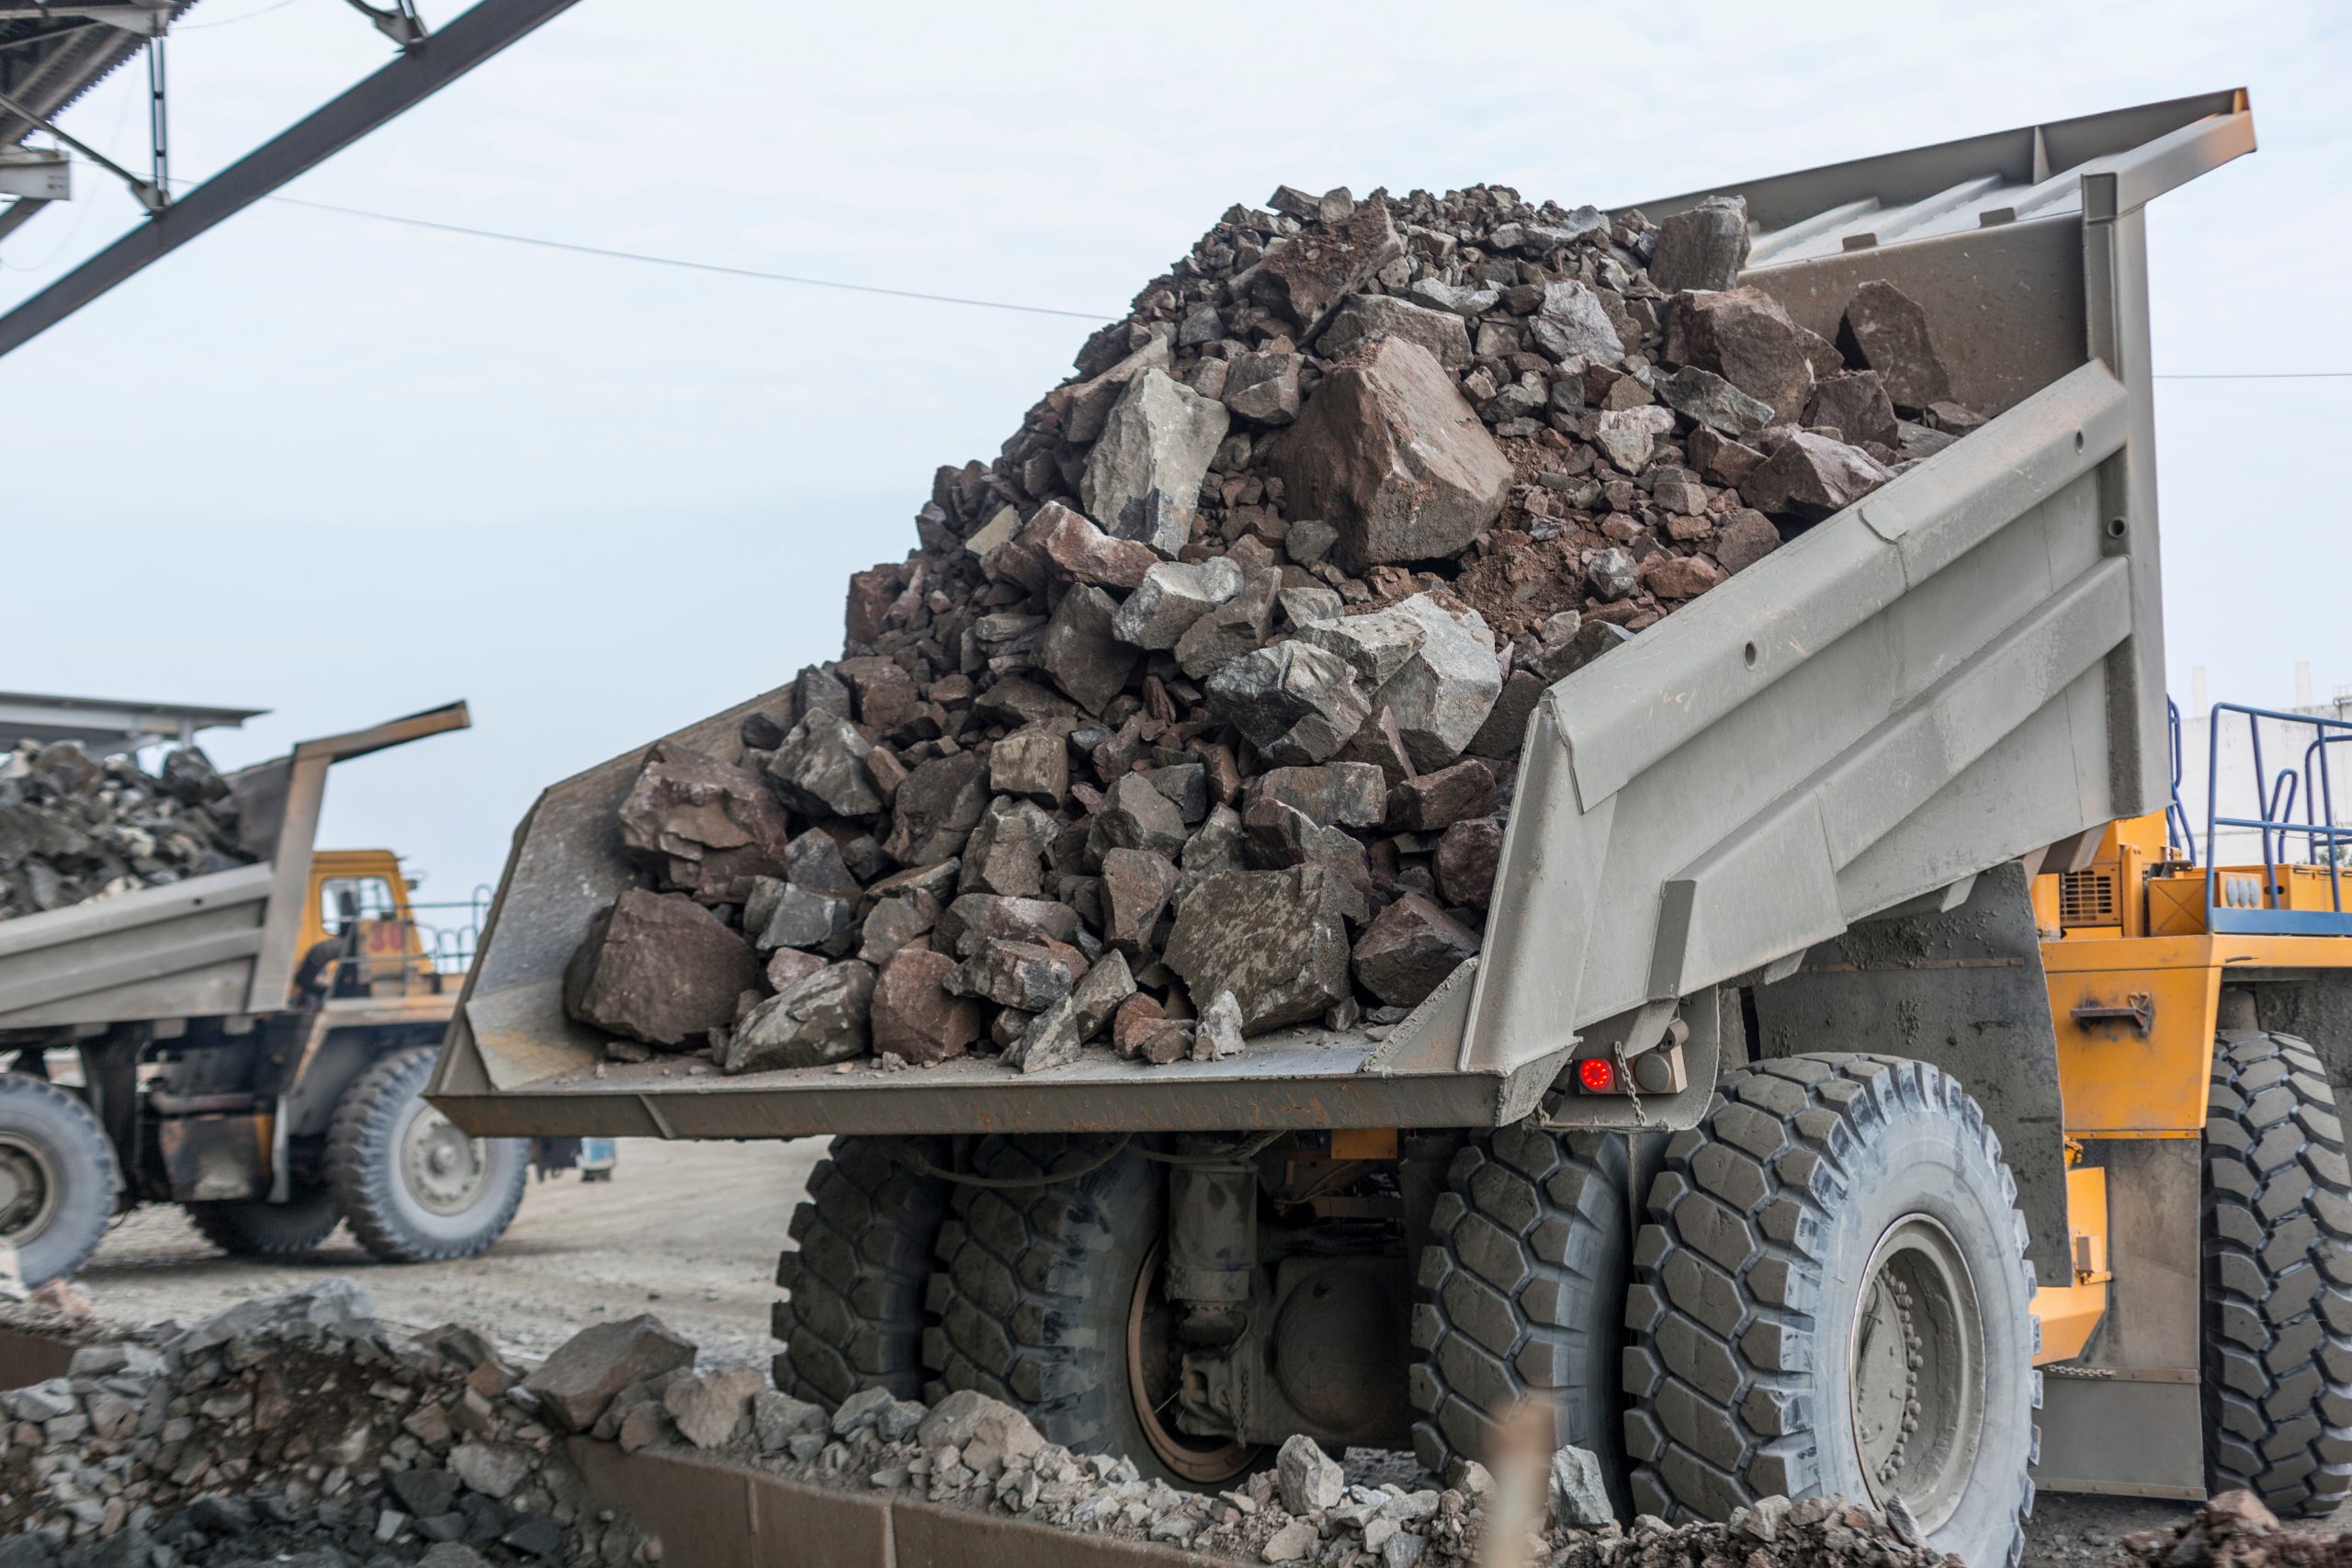 A truck is carrying a large load of rocks and boulders